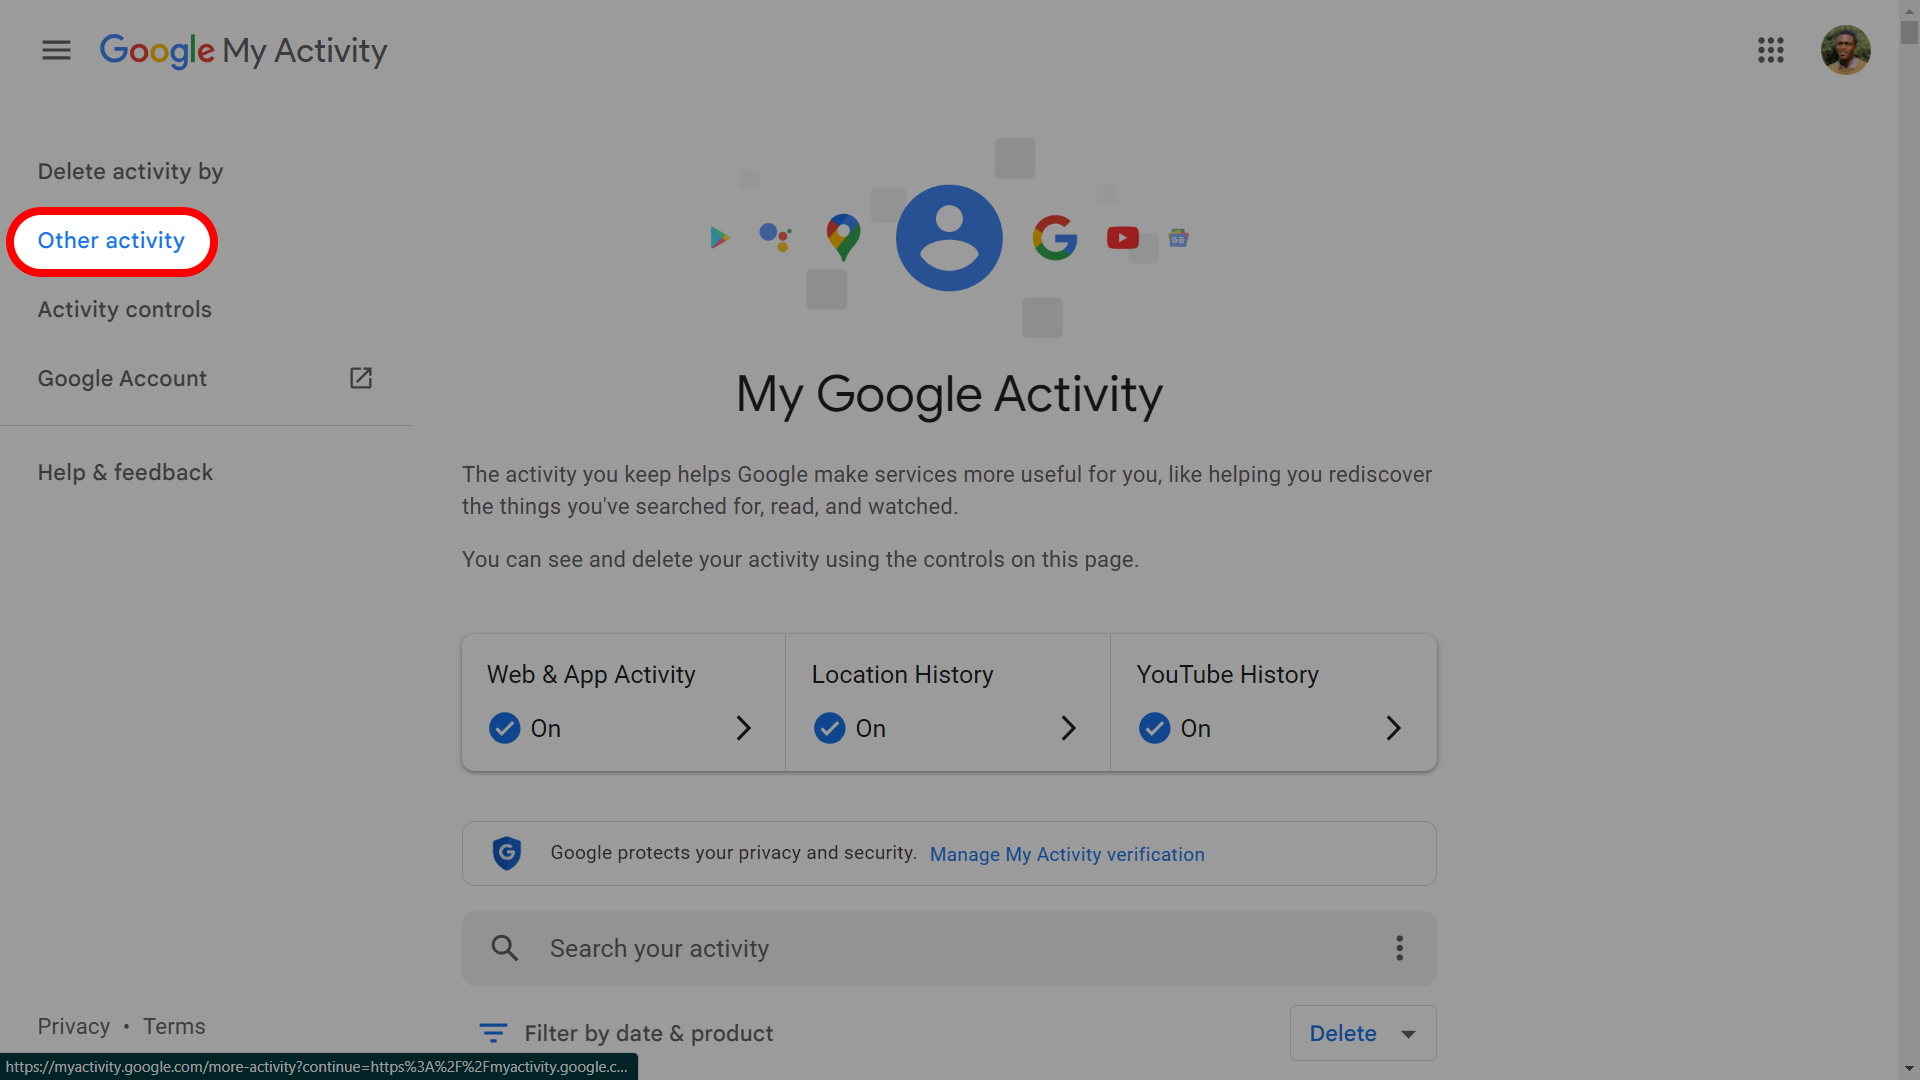 Selecting Other activity on the My Google Activity page